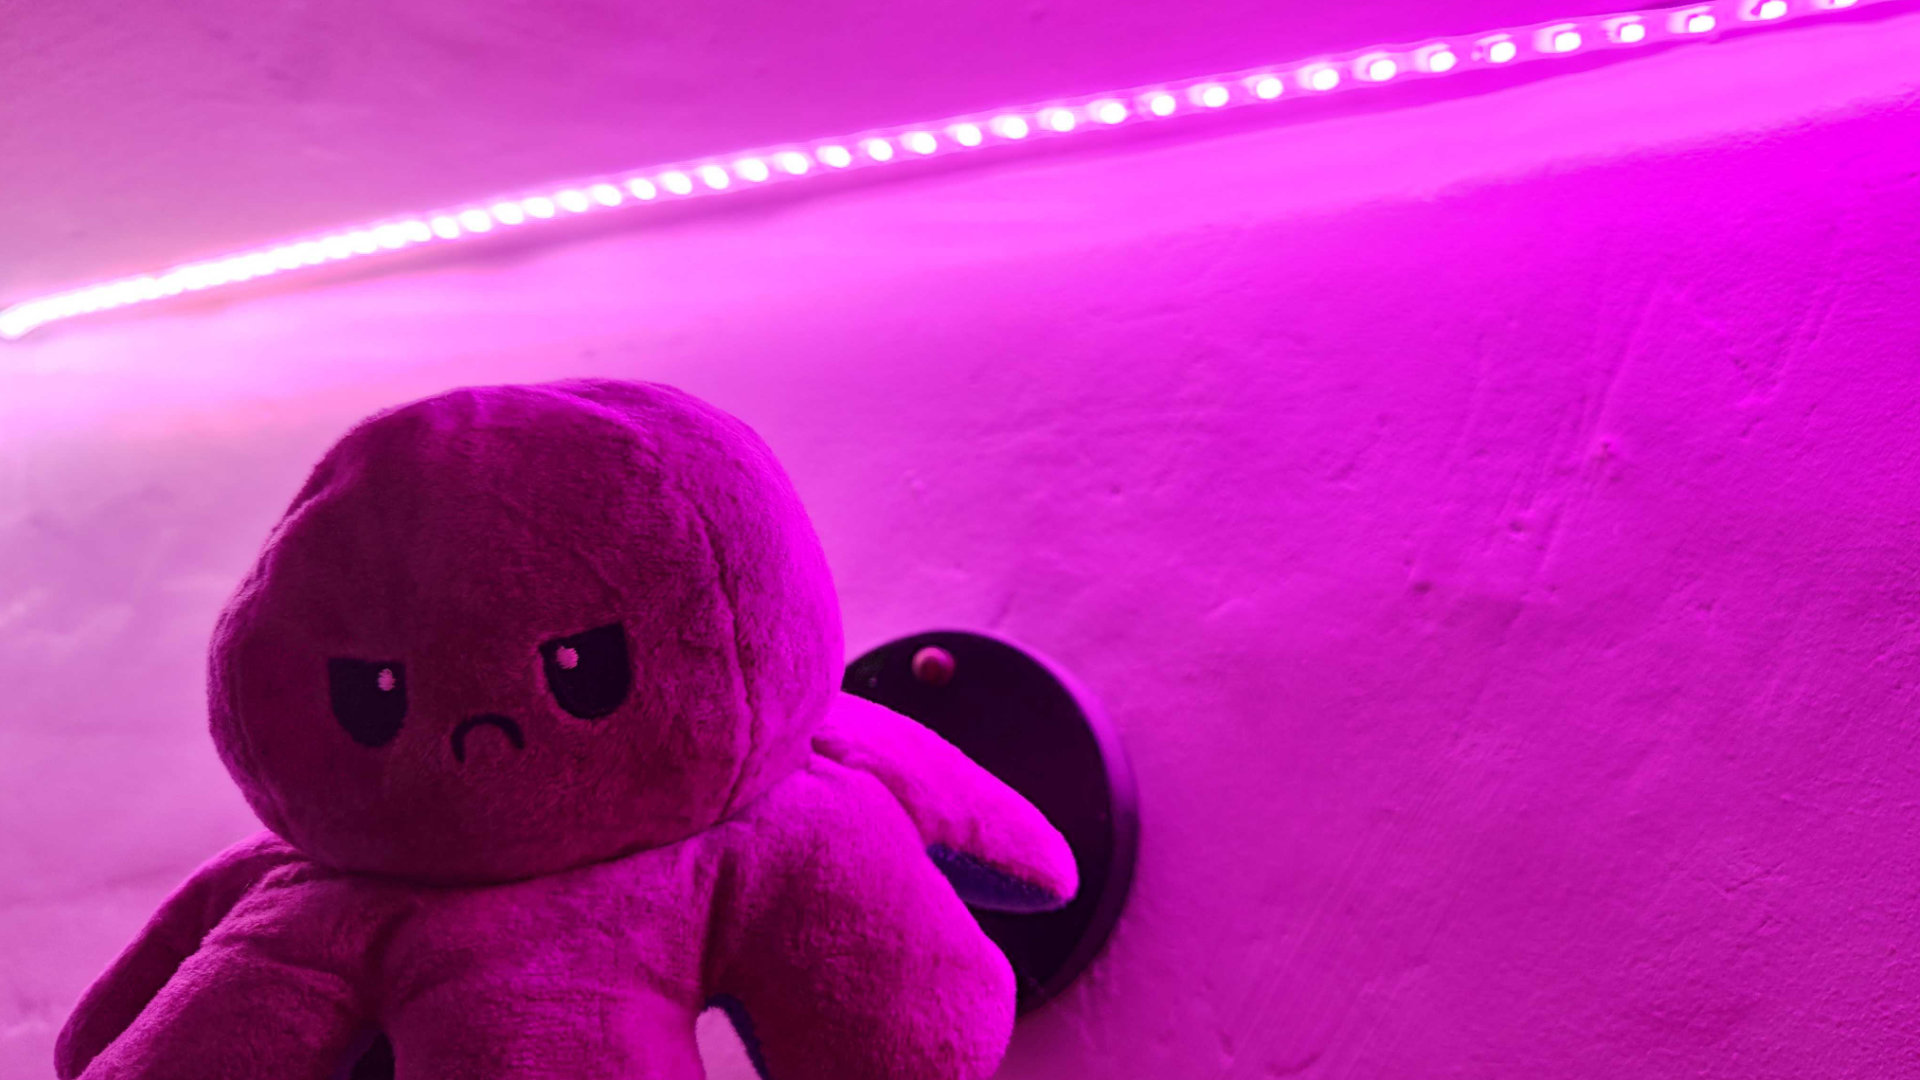 Govee LED Strip Light M1 Review: Brightest and Best